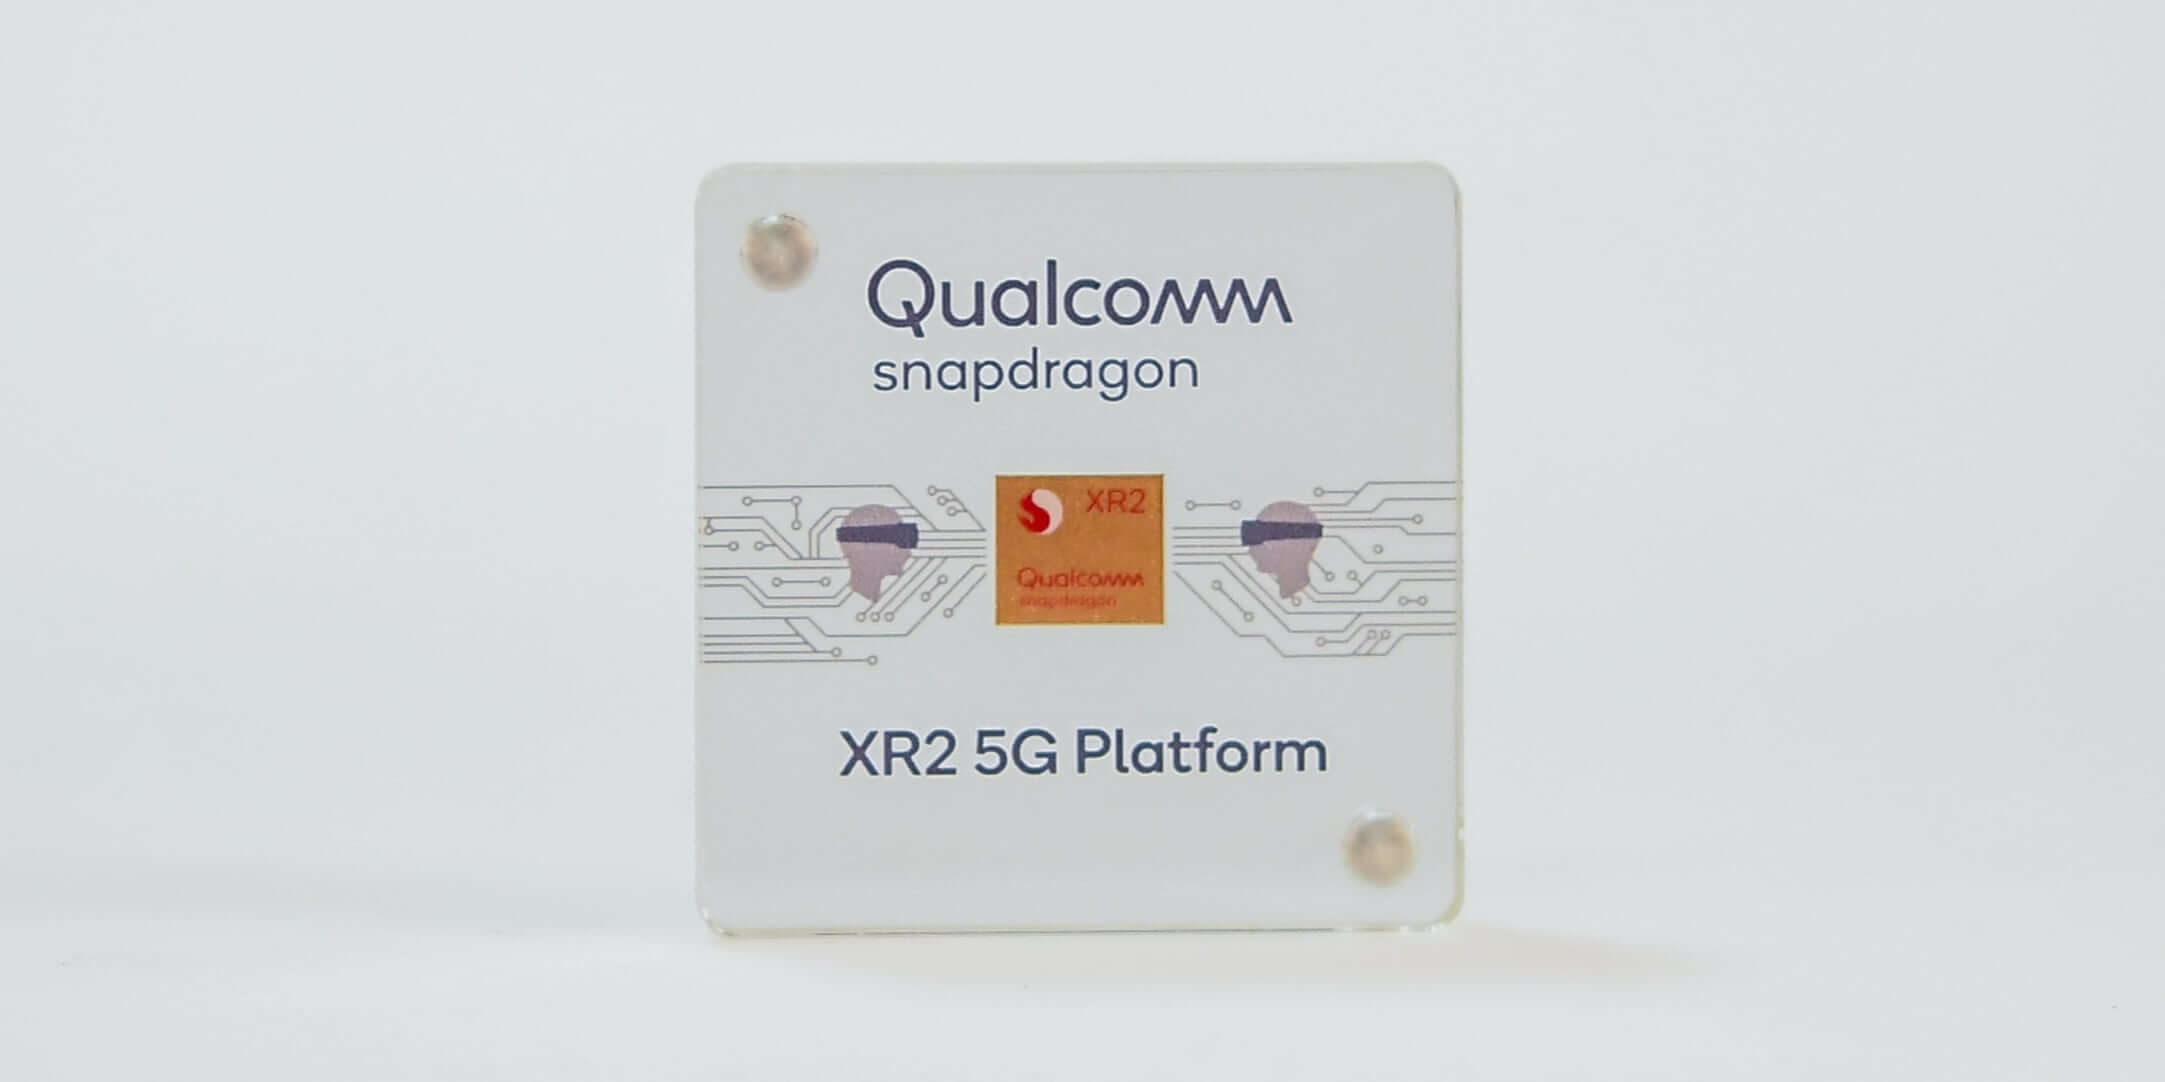 Qualcomm's new Snapdragon XR2 is a 5G-compatible chip for mixed reality headsets